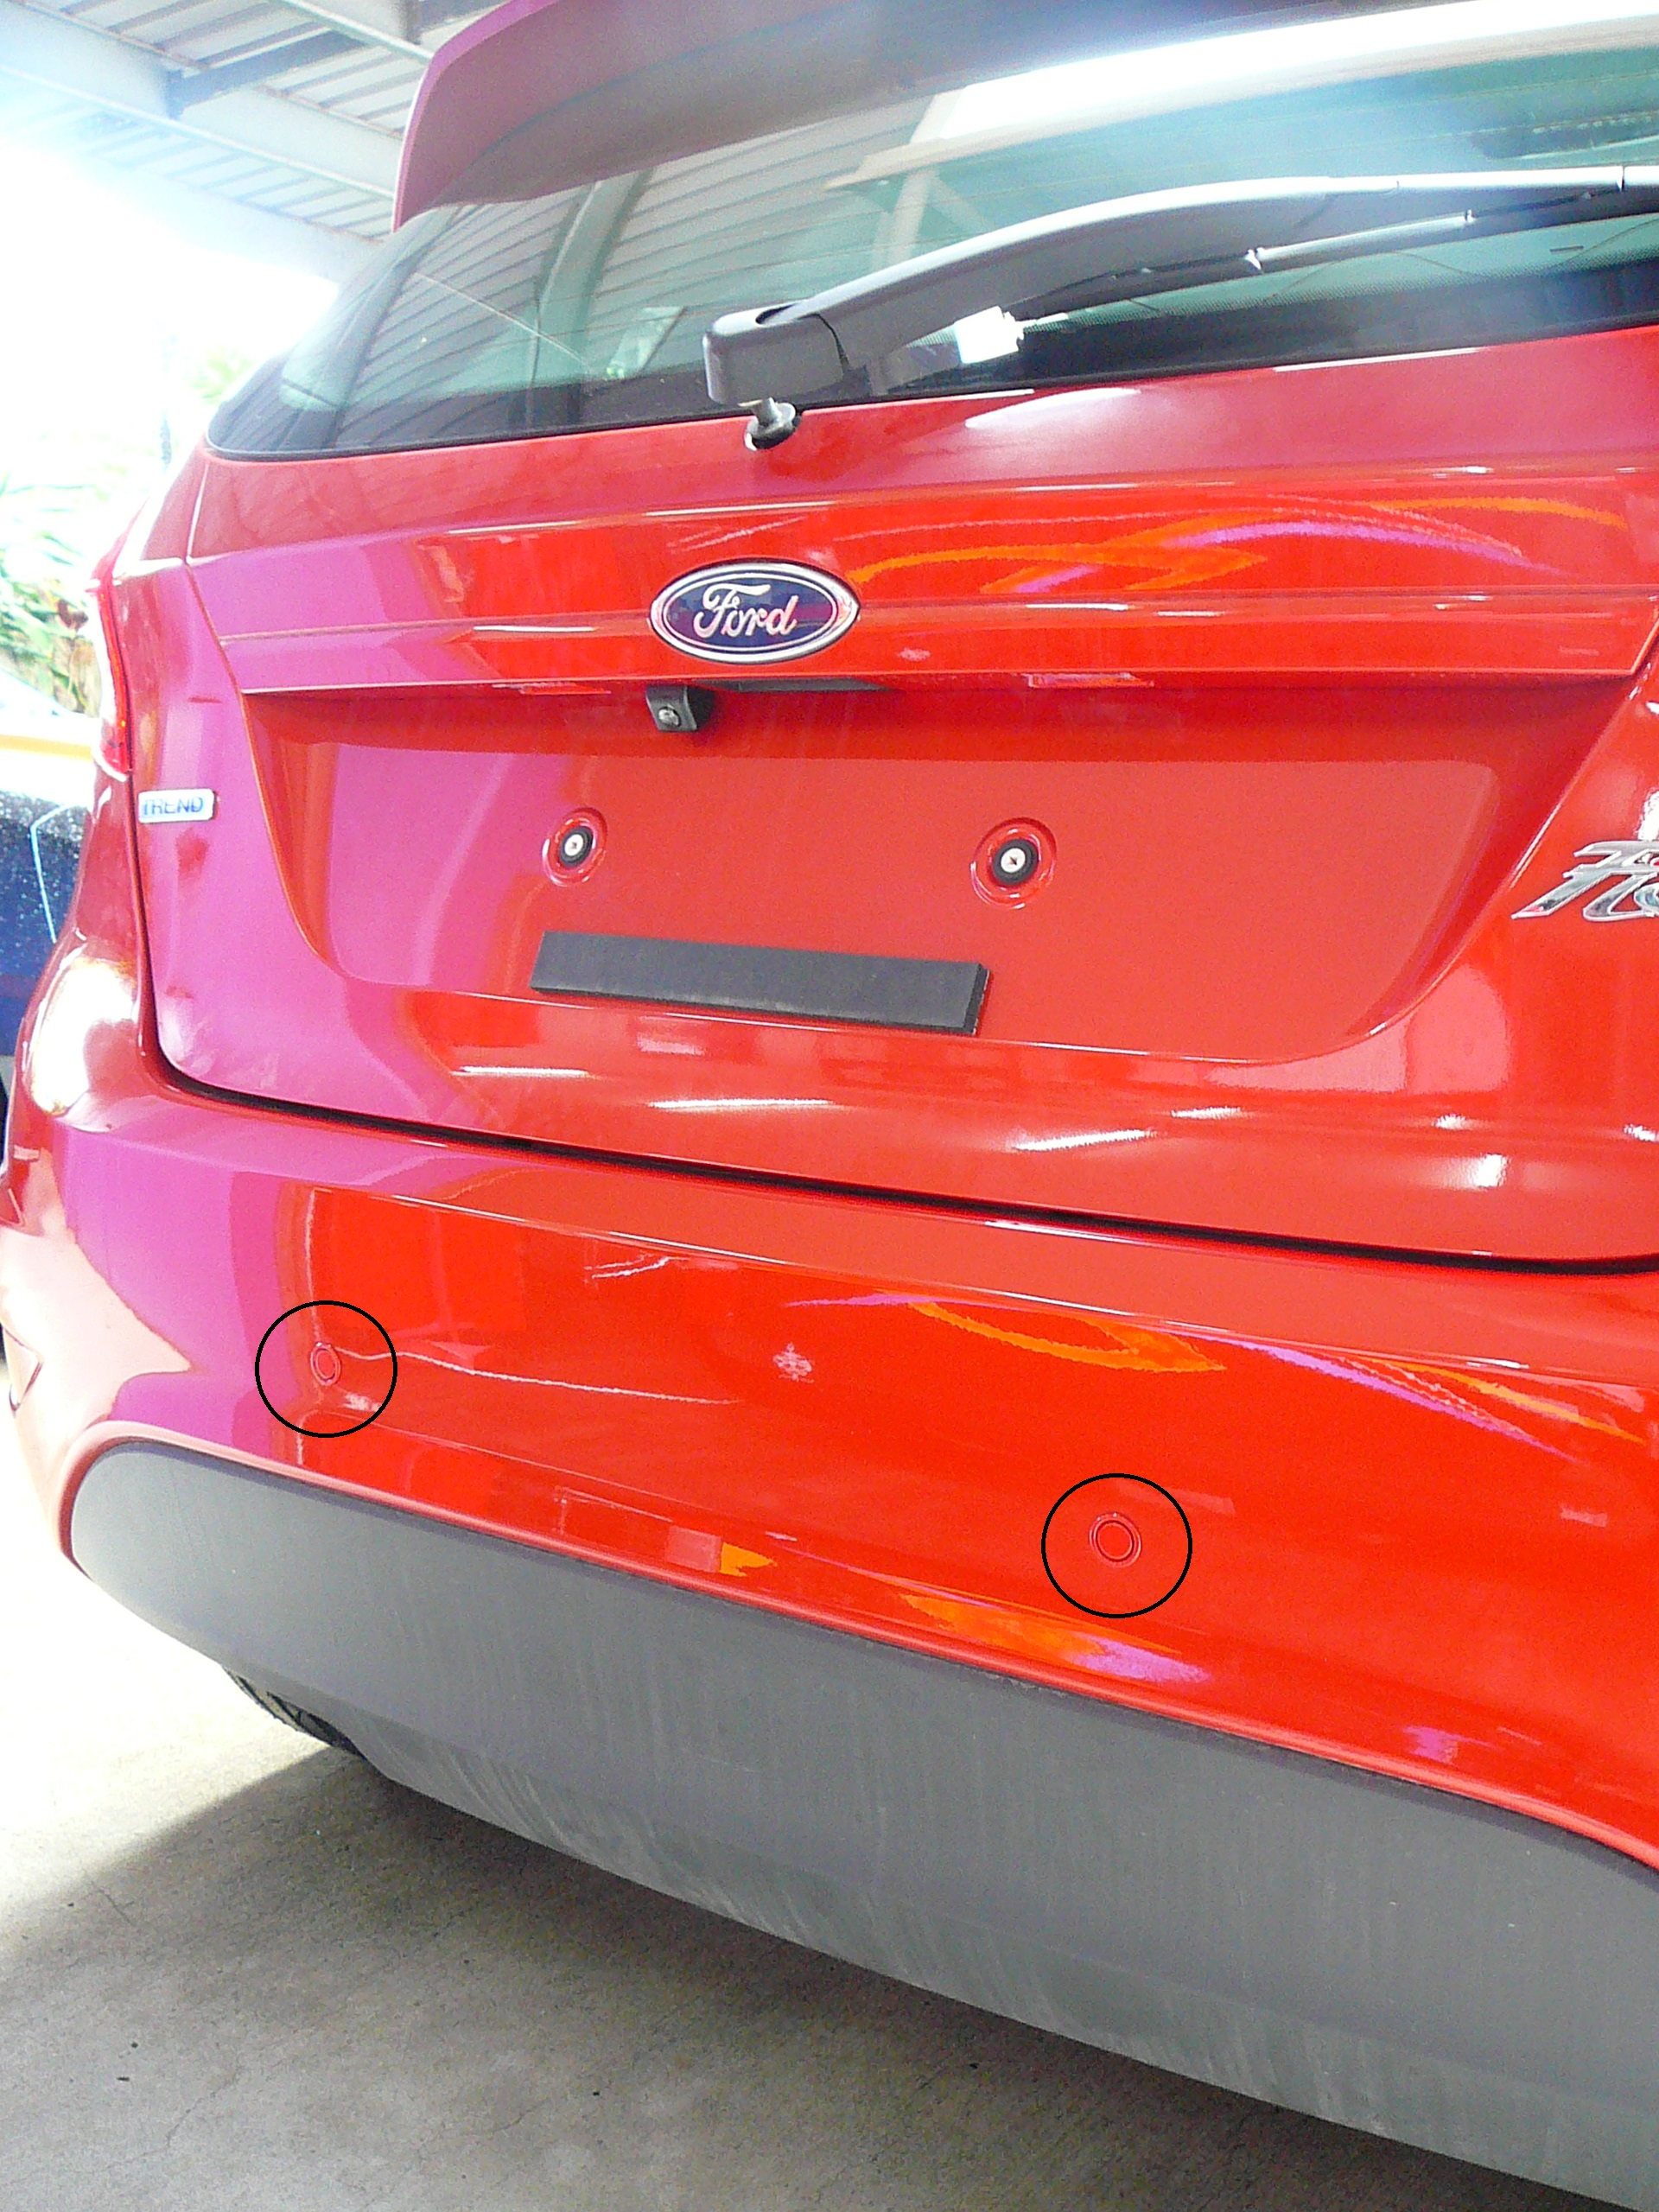 Ford Fiesta 2014, Parking Sensors and Mirror Monitor with Reverse Camera